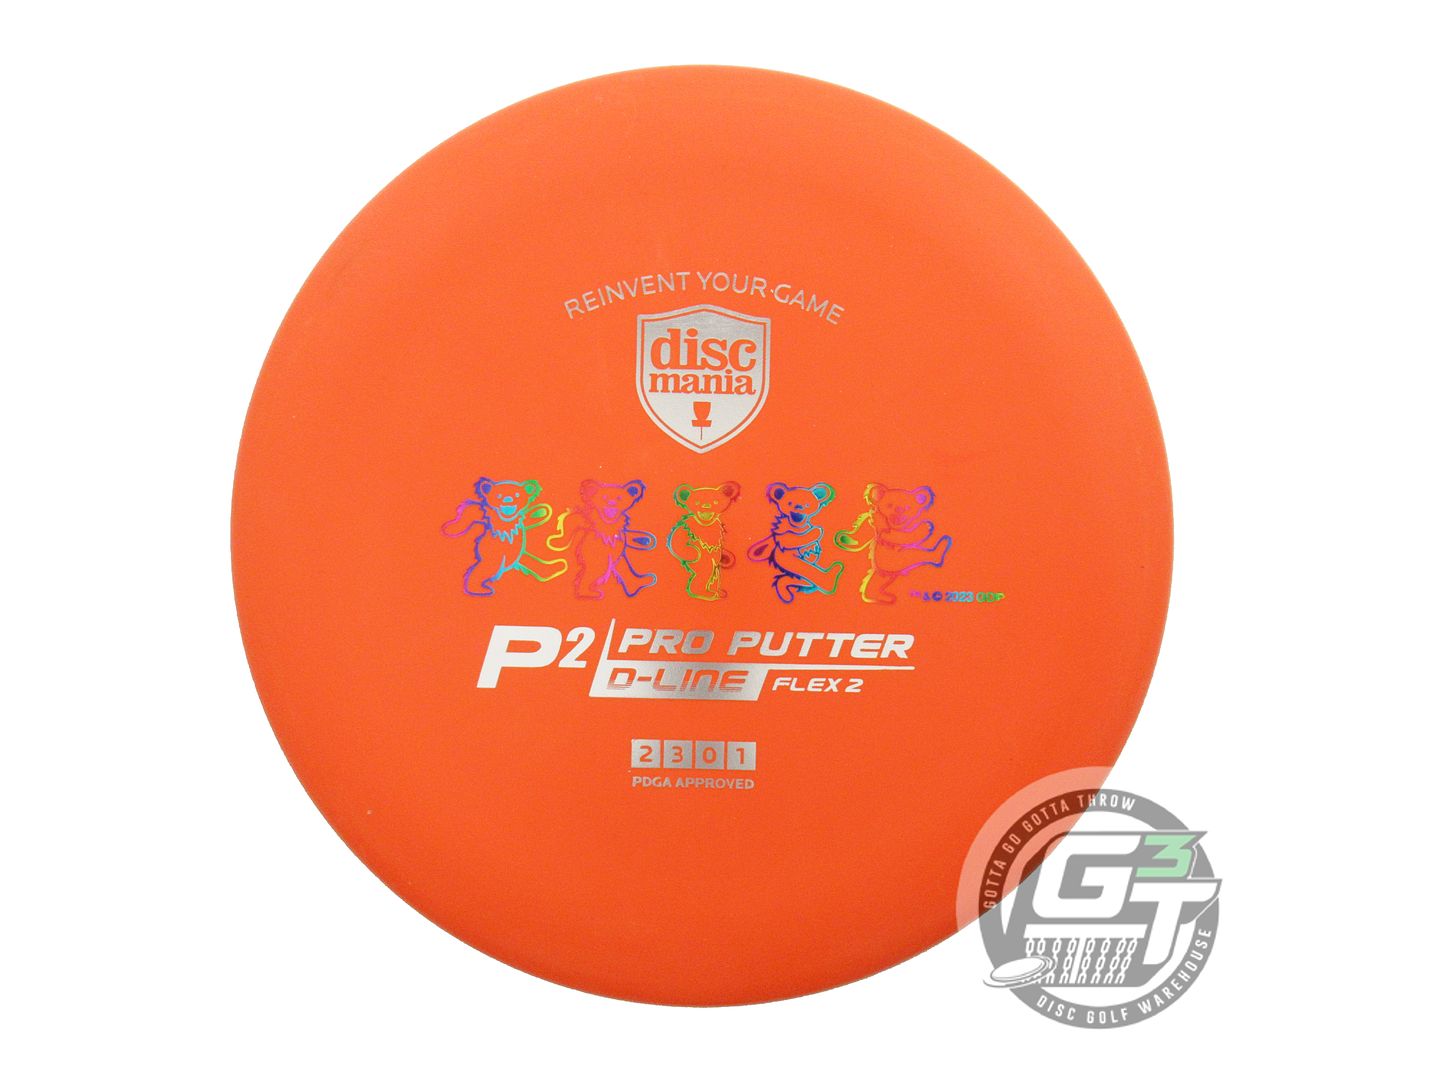 Discmania Limited Edition Grateful Dead Dancing Bears Stamp D-Line Flex 2 P2 Pro Putter Golf Disc (Individually Listed)